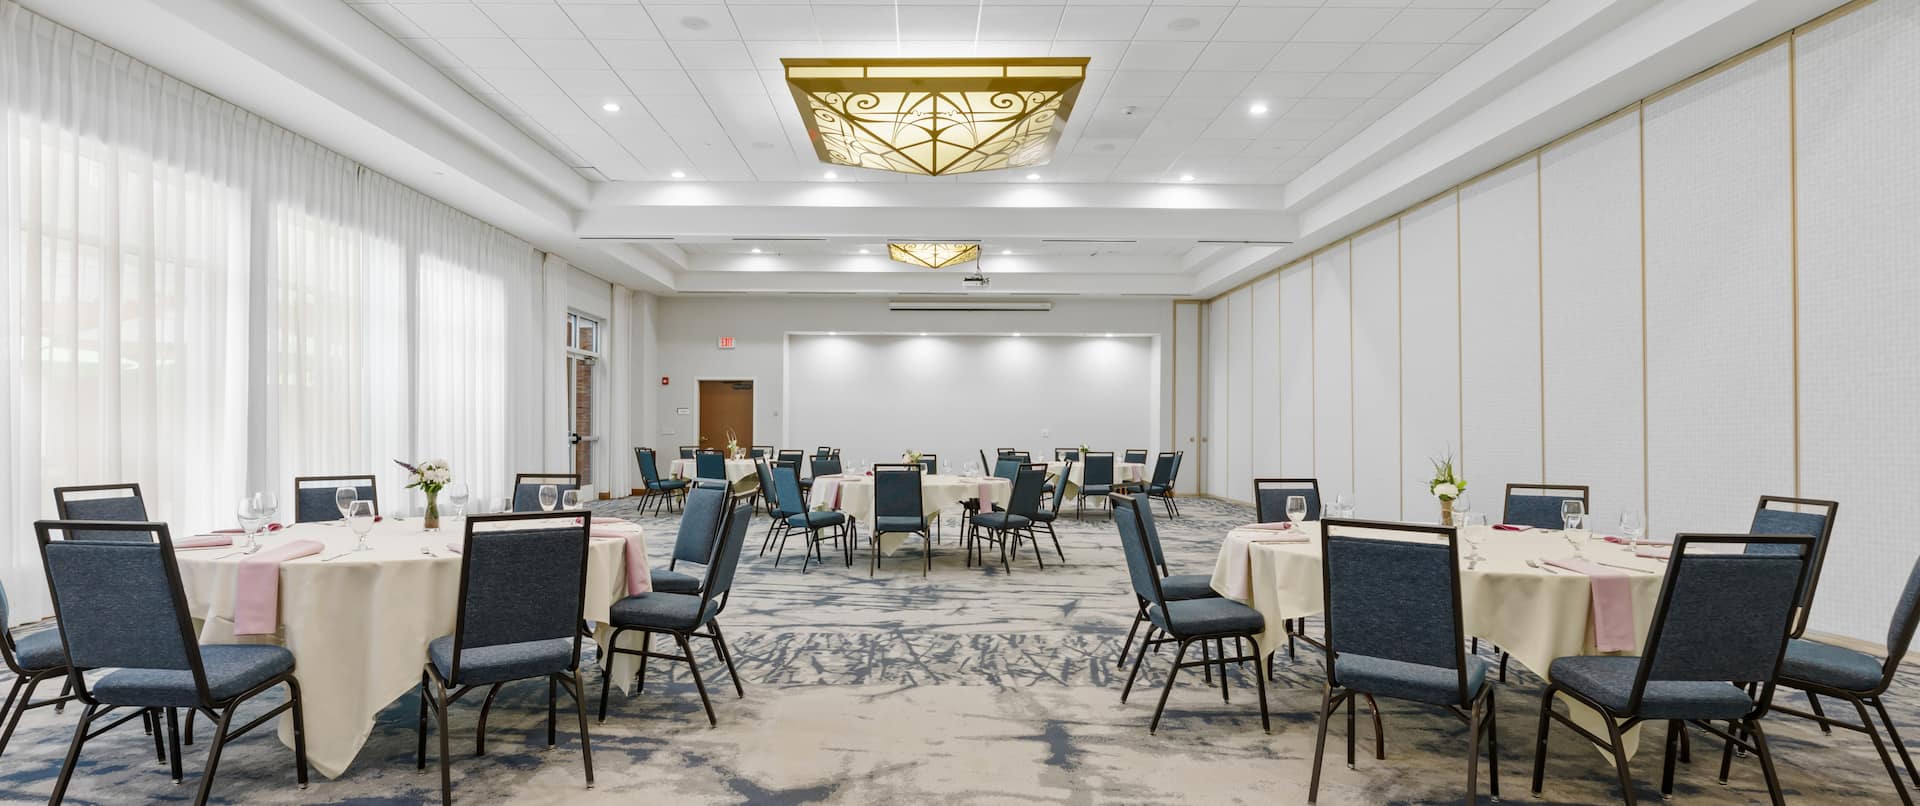 Reisling meeting room, banquet round tables